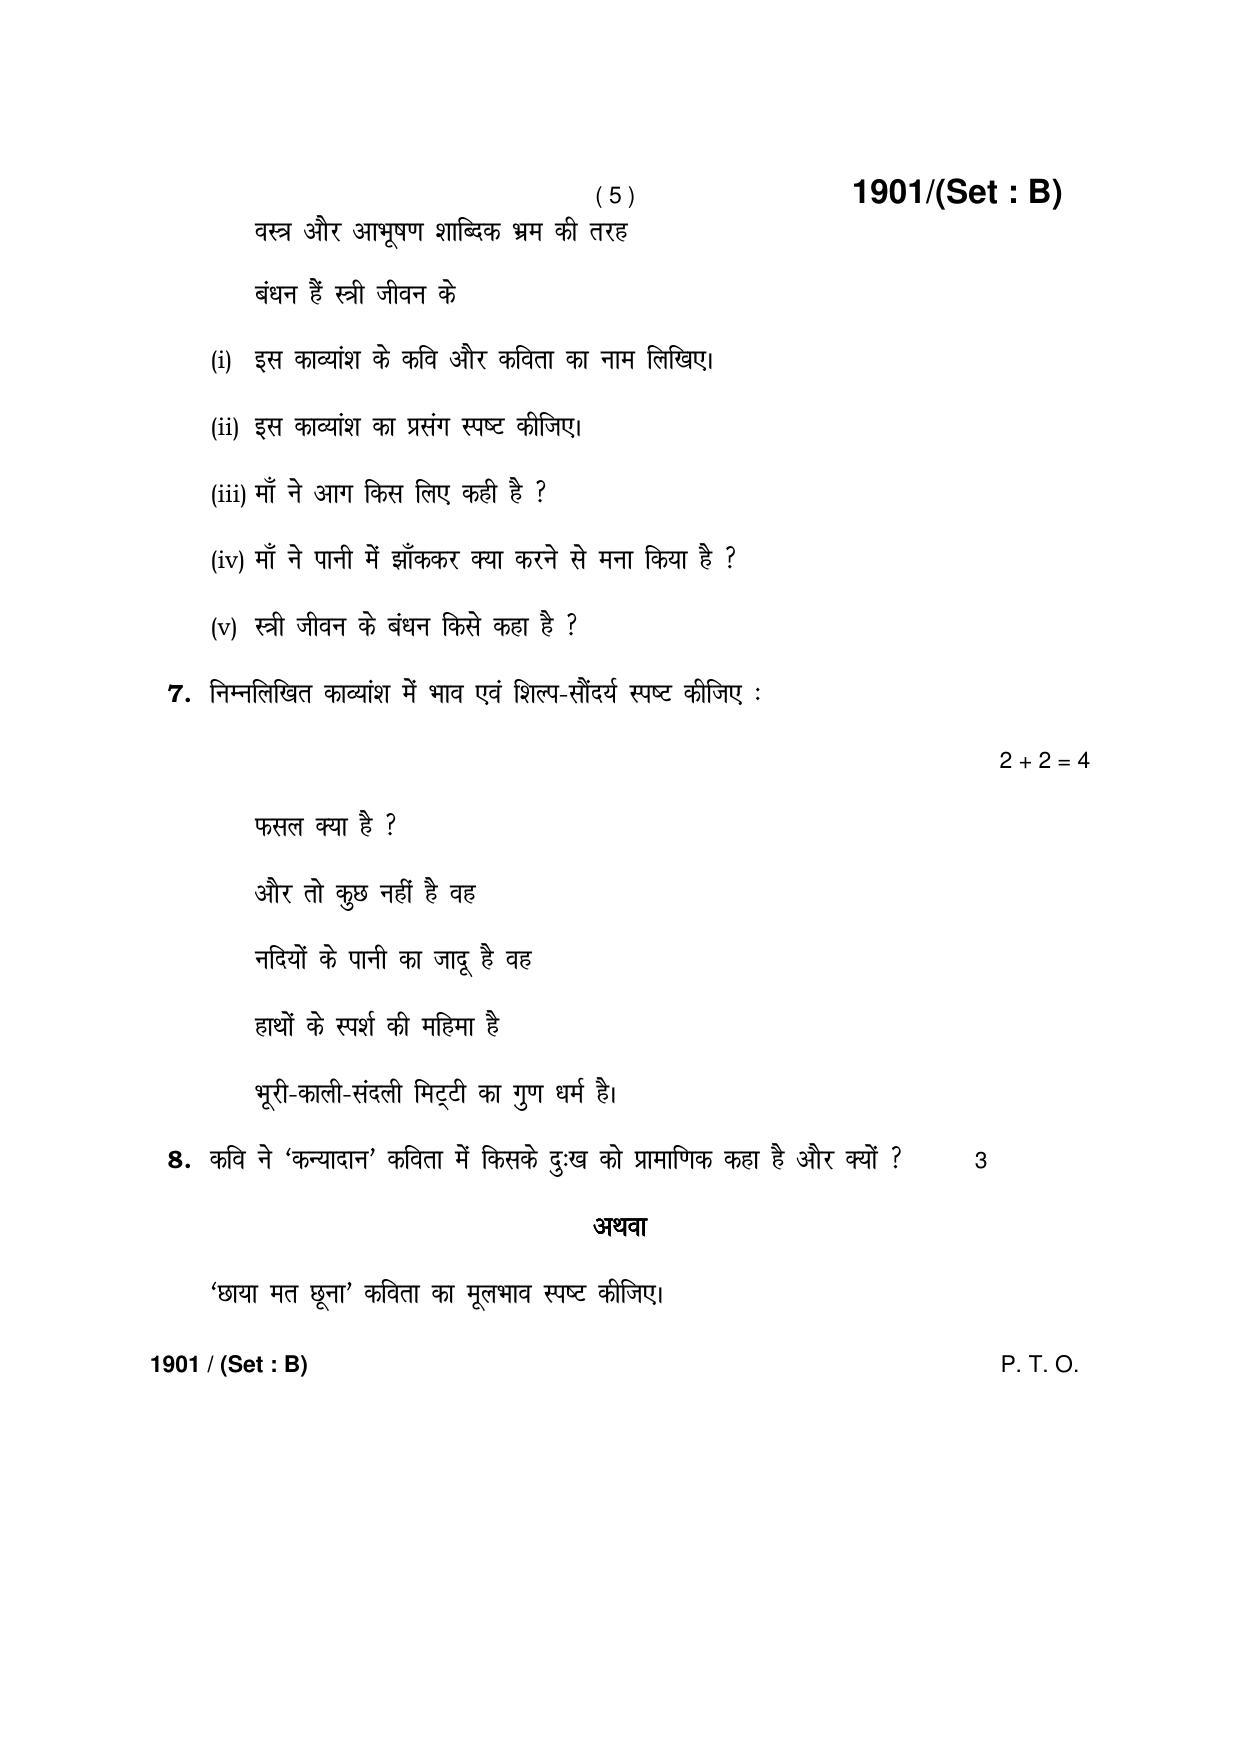 Haryana Board HBSE Class 10 Hindi -B 2017 Question Paper - Page 5